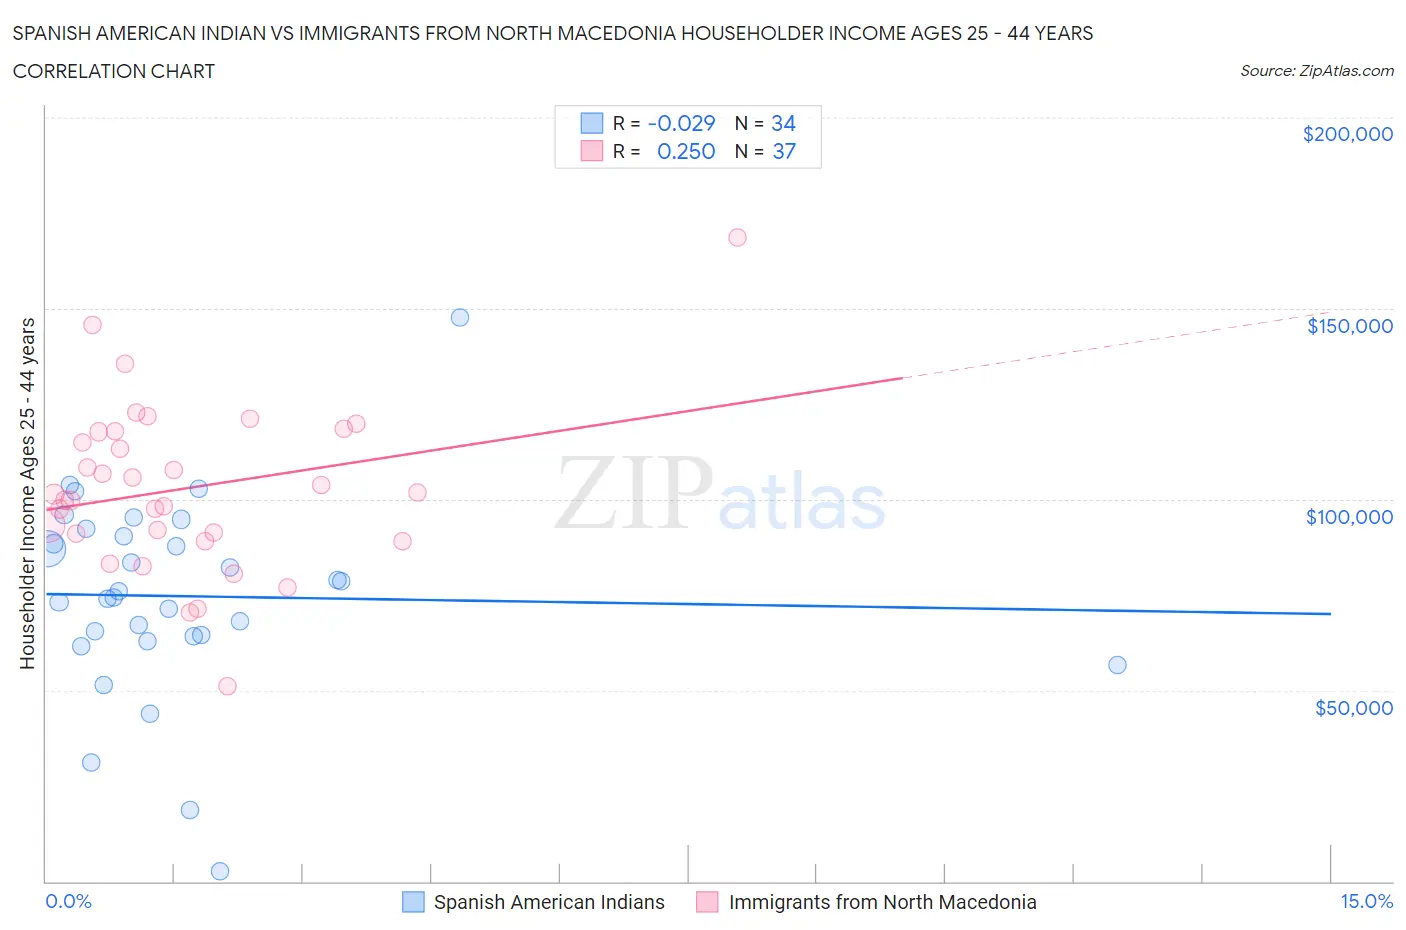 Spanish American Indian vs Immigrants from North Macedonia Householder Income Ages 25 - 44 years